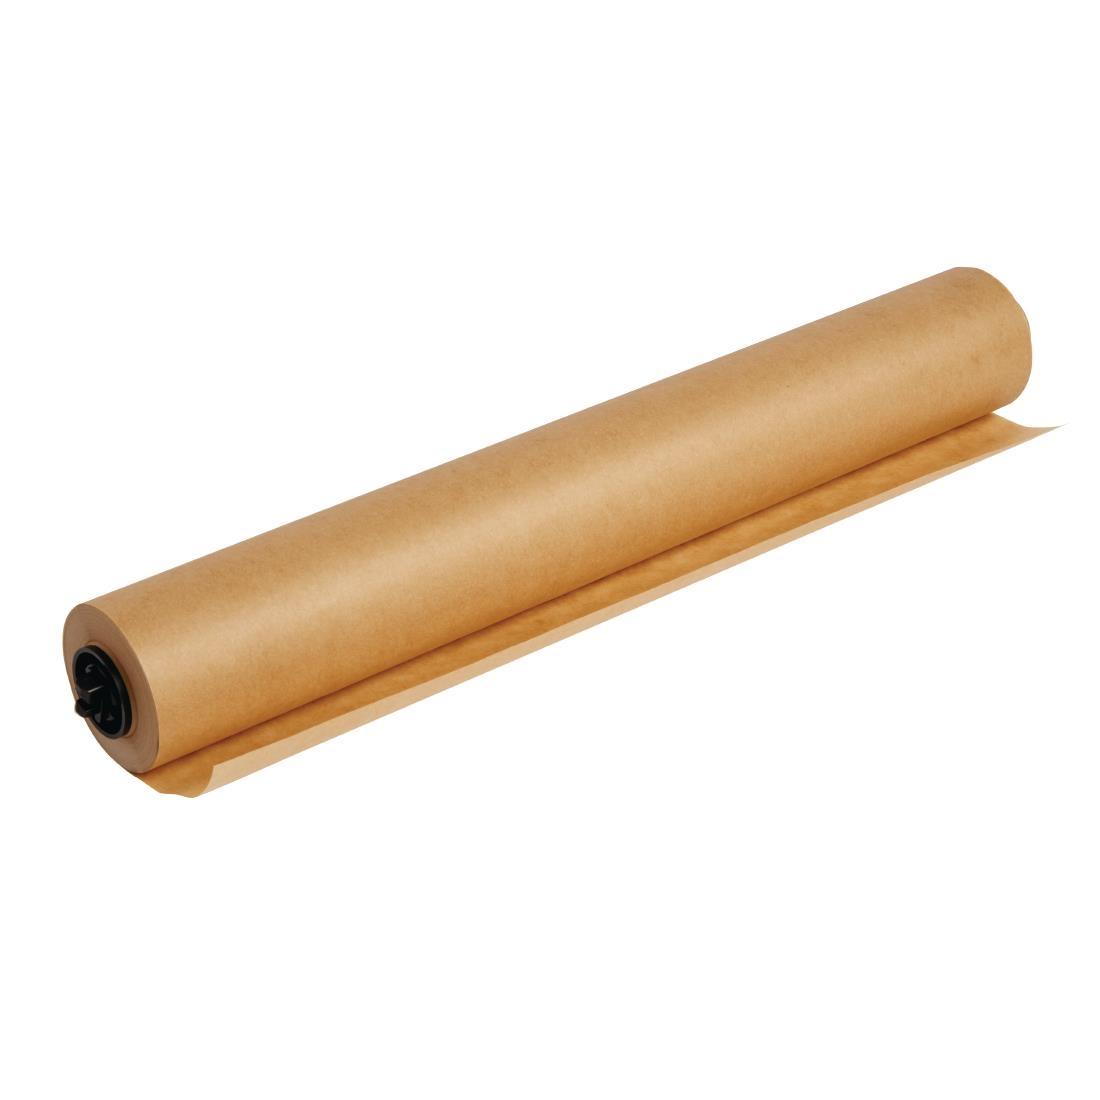 Wrapmaster Baking Parchment 450mm x 50m (Pack of 3) - GM215  - 2